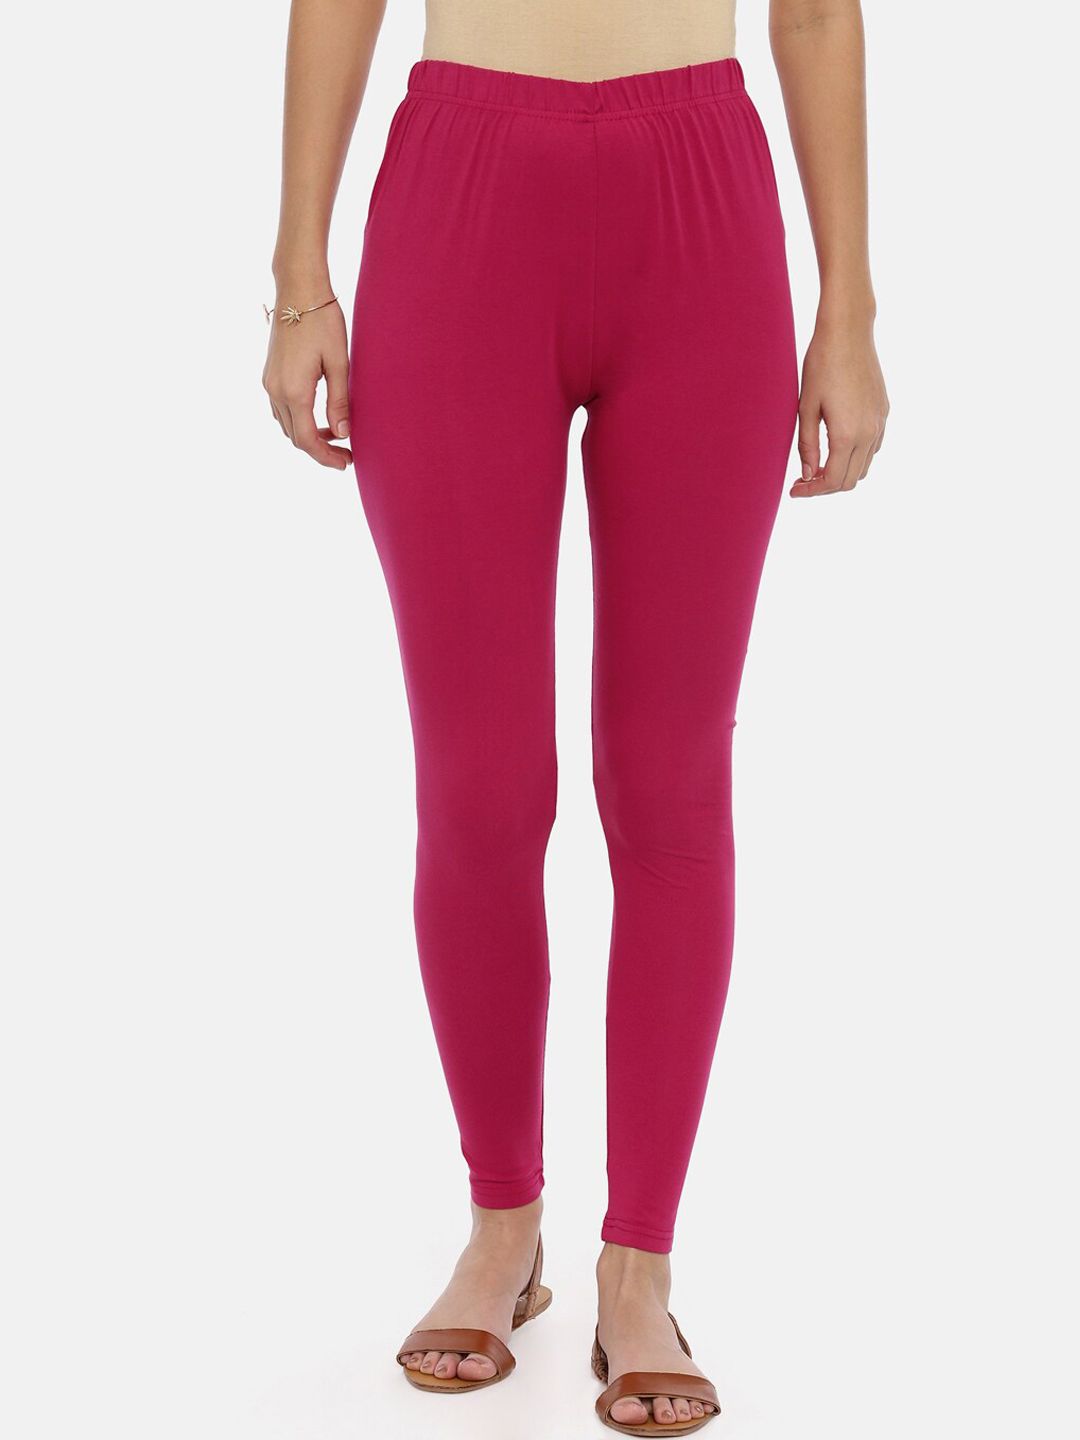 Souchii Women Magenta Solid Slim-Fit Ankle-Length Leggings Price in India